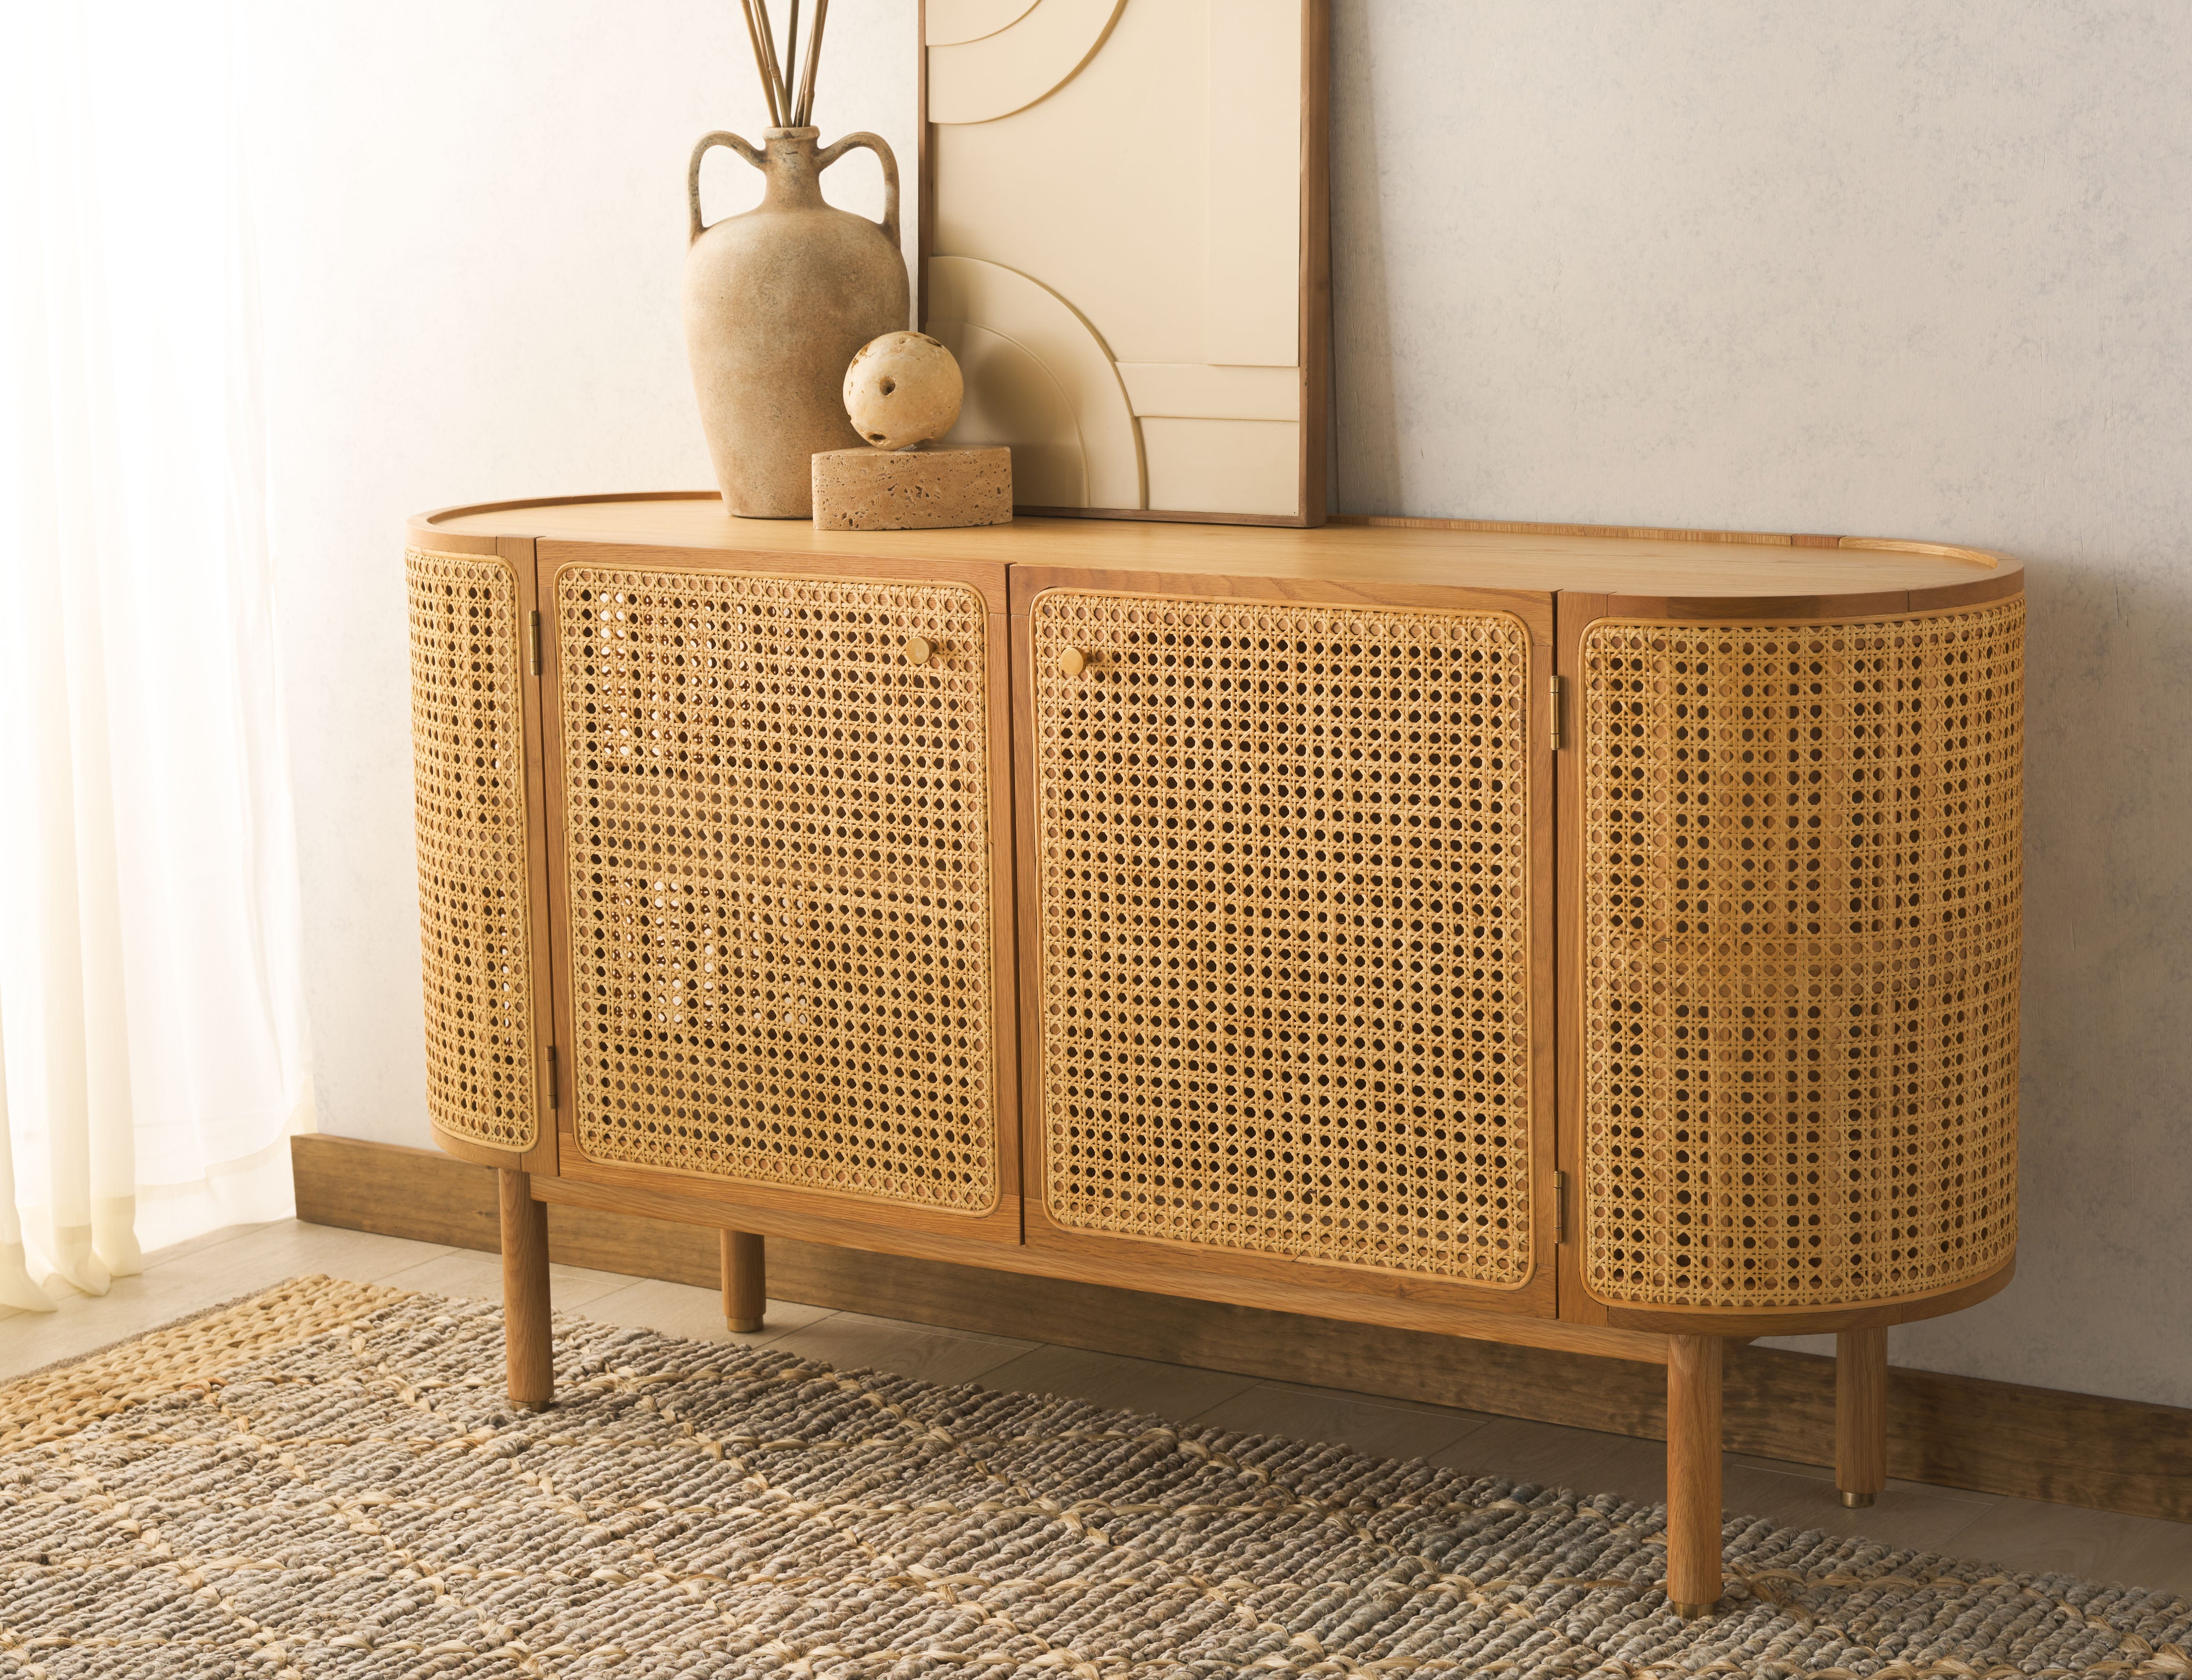 Safavieh Couture Dolly Cane And Wood Sideboard, SFV4204